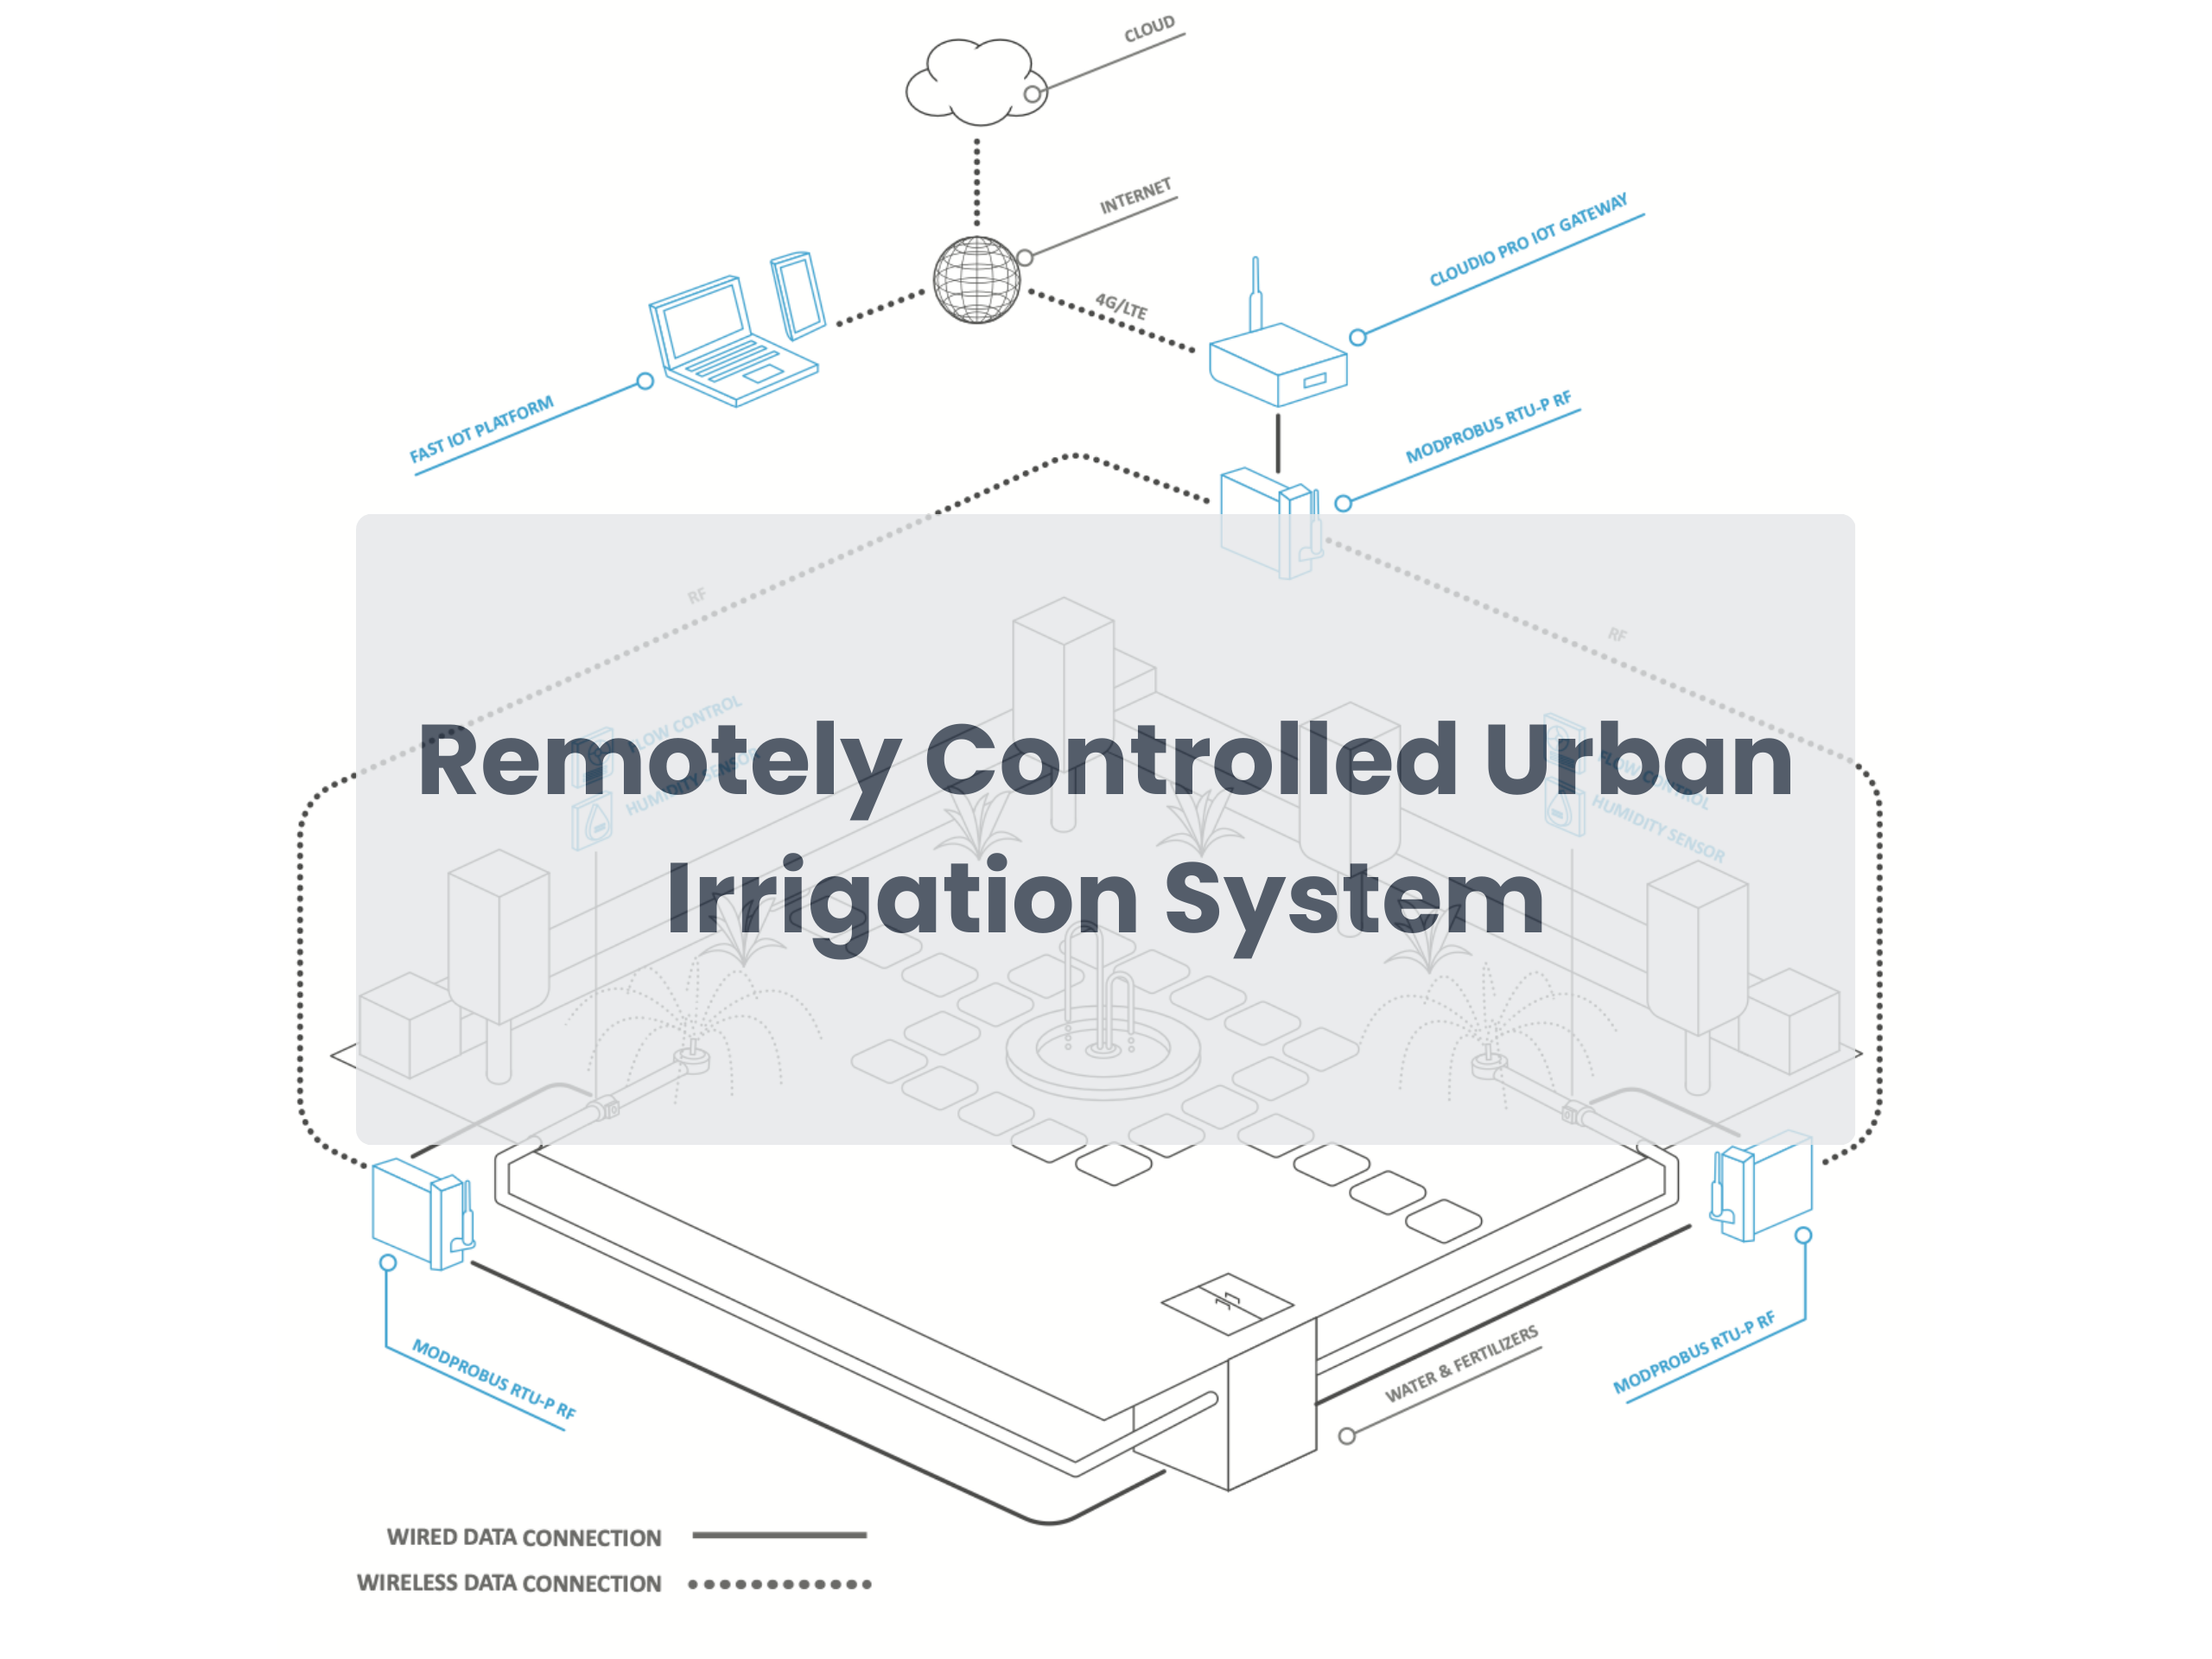 Remotely Controlled Urban Irrigation System